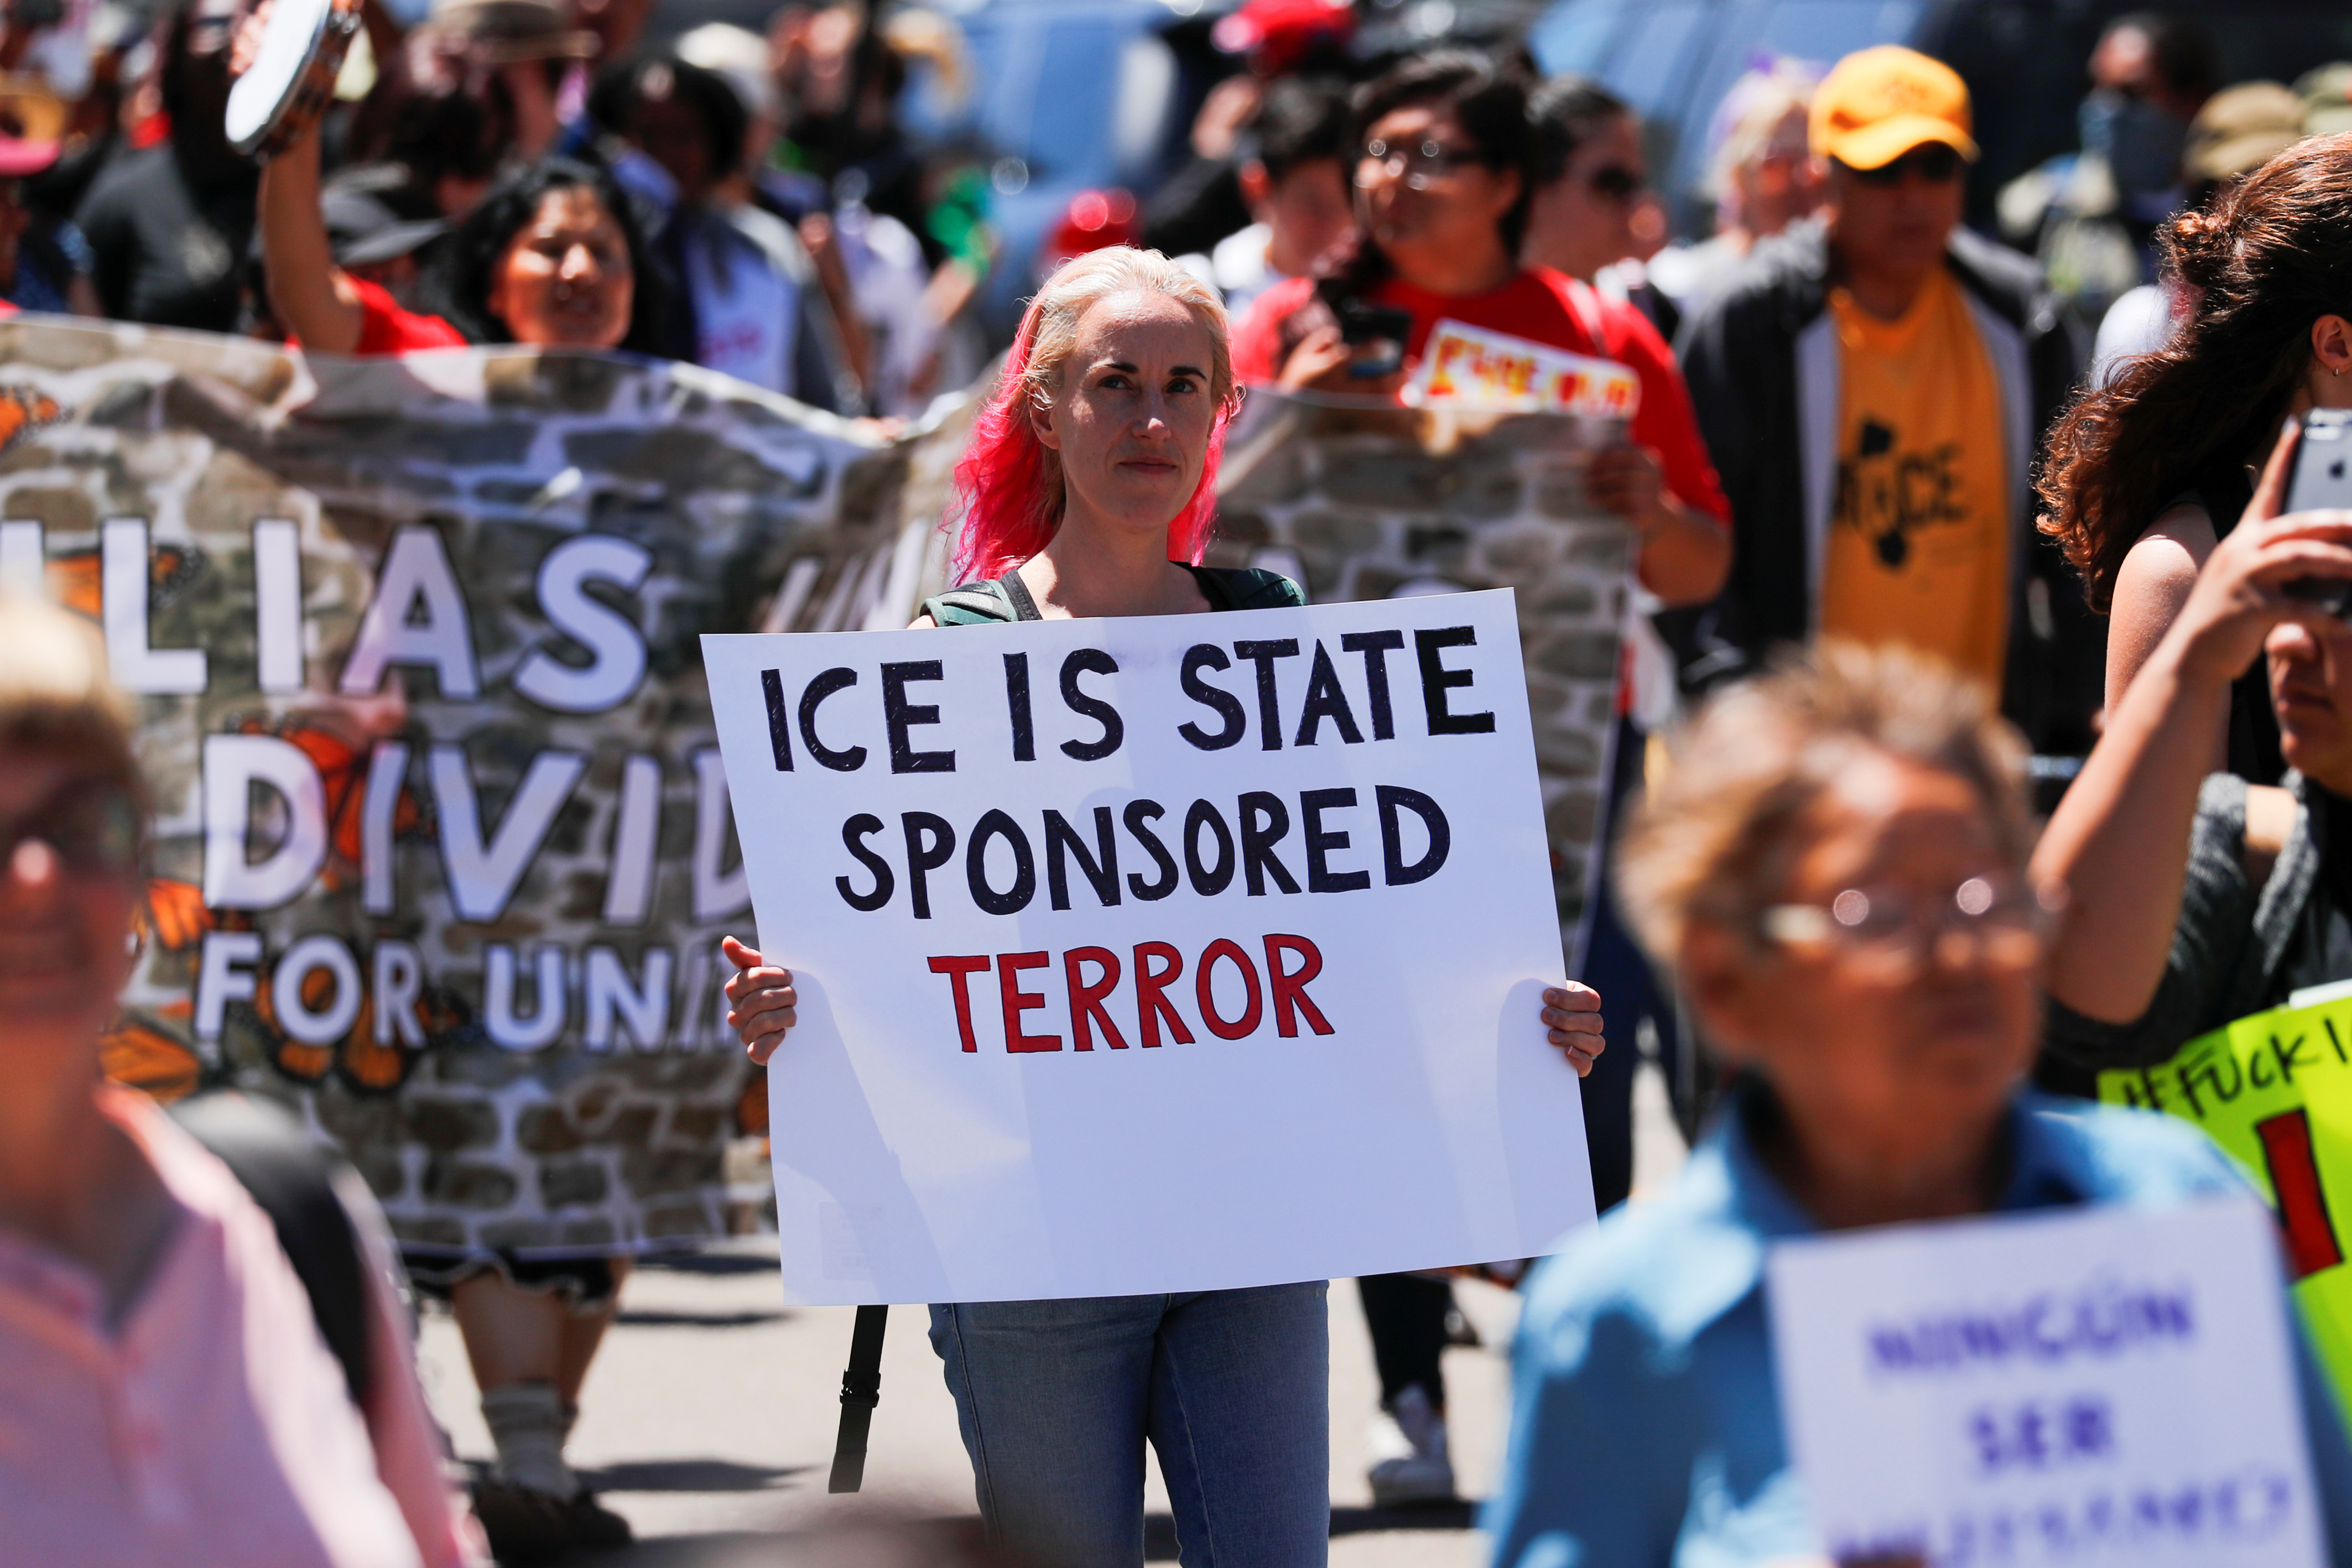 People march during a "Free Our Future" demonstration to protest the expected introduction of the U.S. Department of Justice and Immigration Customs Enforcement ( I.C.E.) new sped up mass immigration hearings and deportation in San Diego, California, U.S. July 2, 2018. REUTERS/Mike Blake